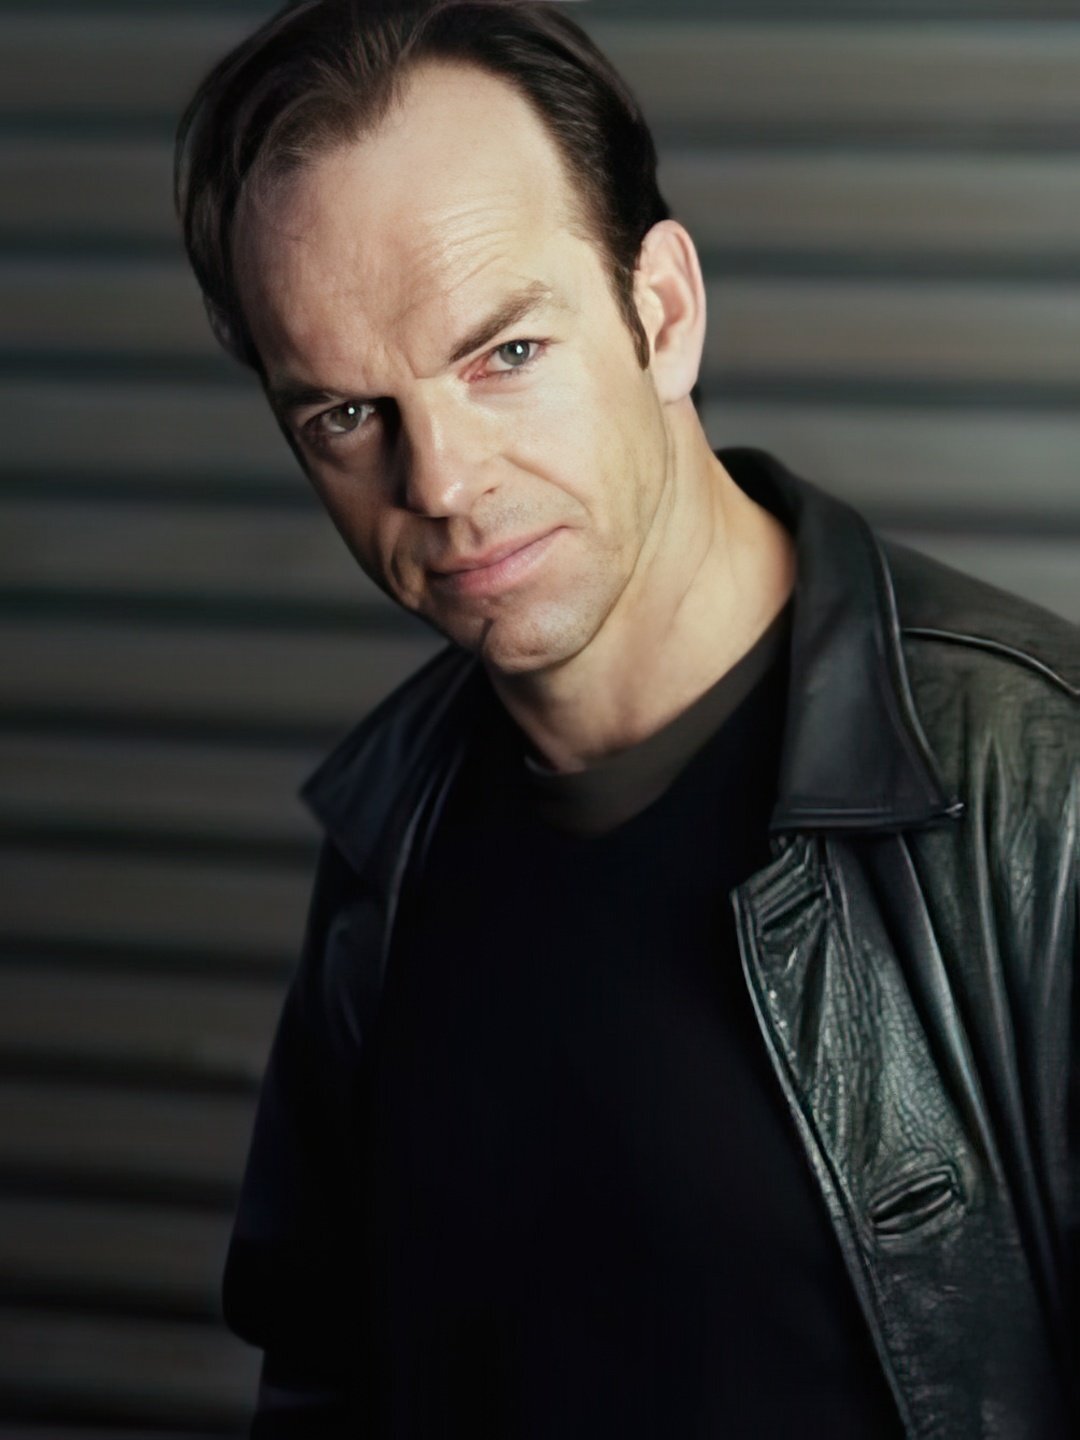 Hugo Weaving who is his father